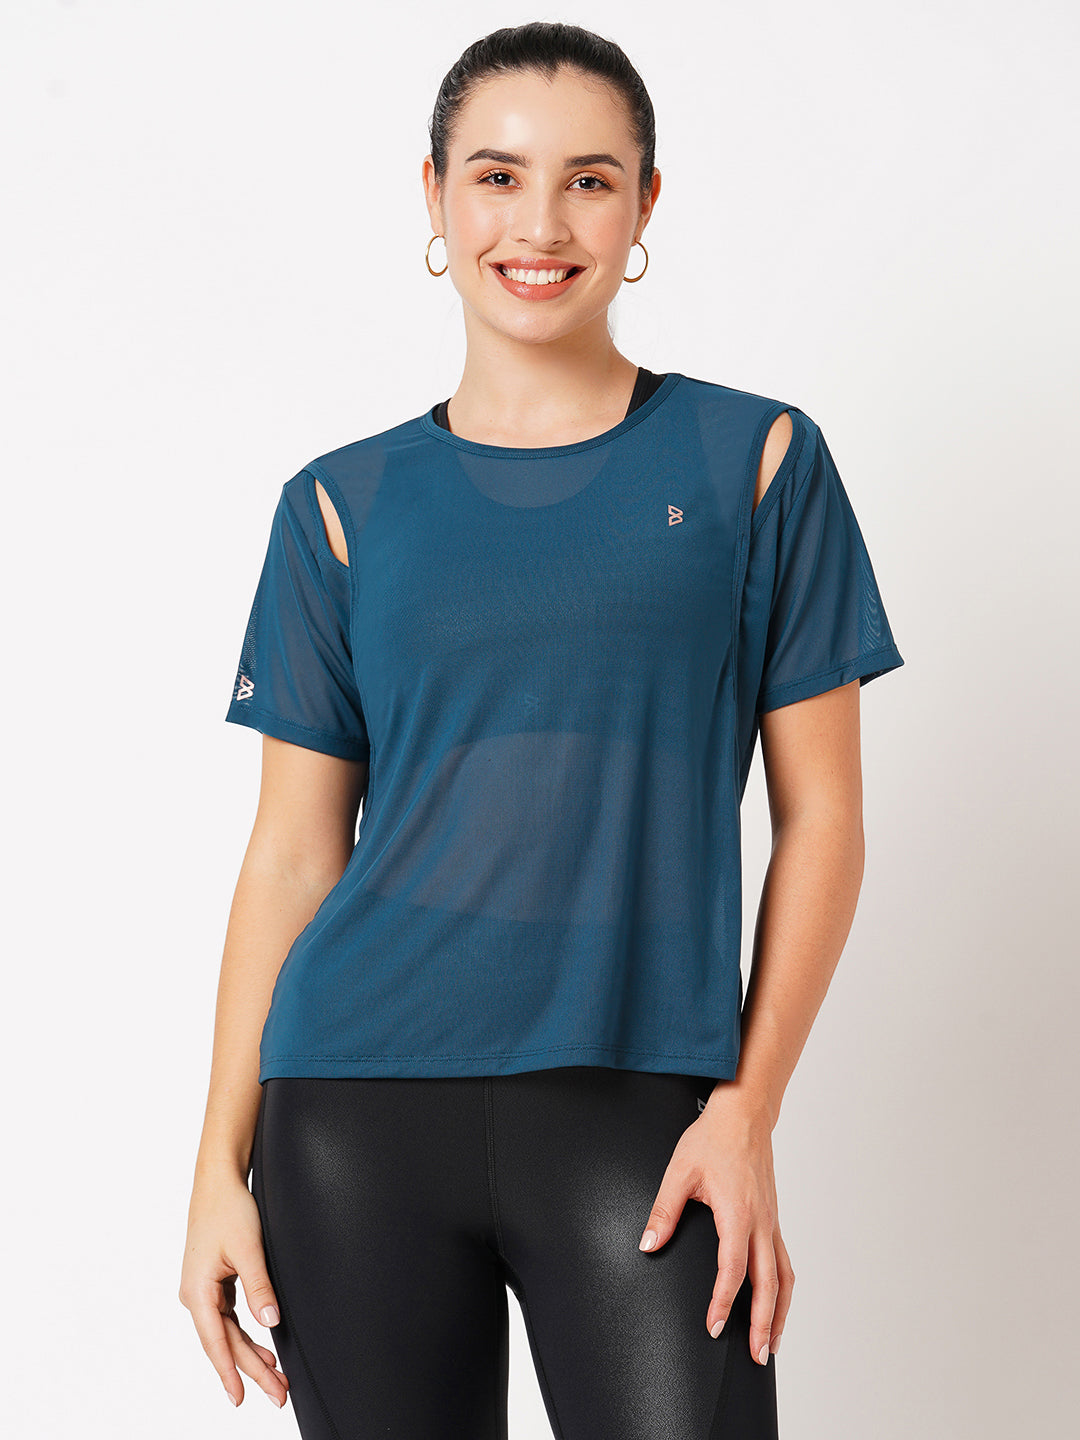 Teal Cut Out Mesh Tee BODD ACTIVE